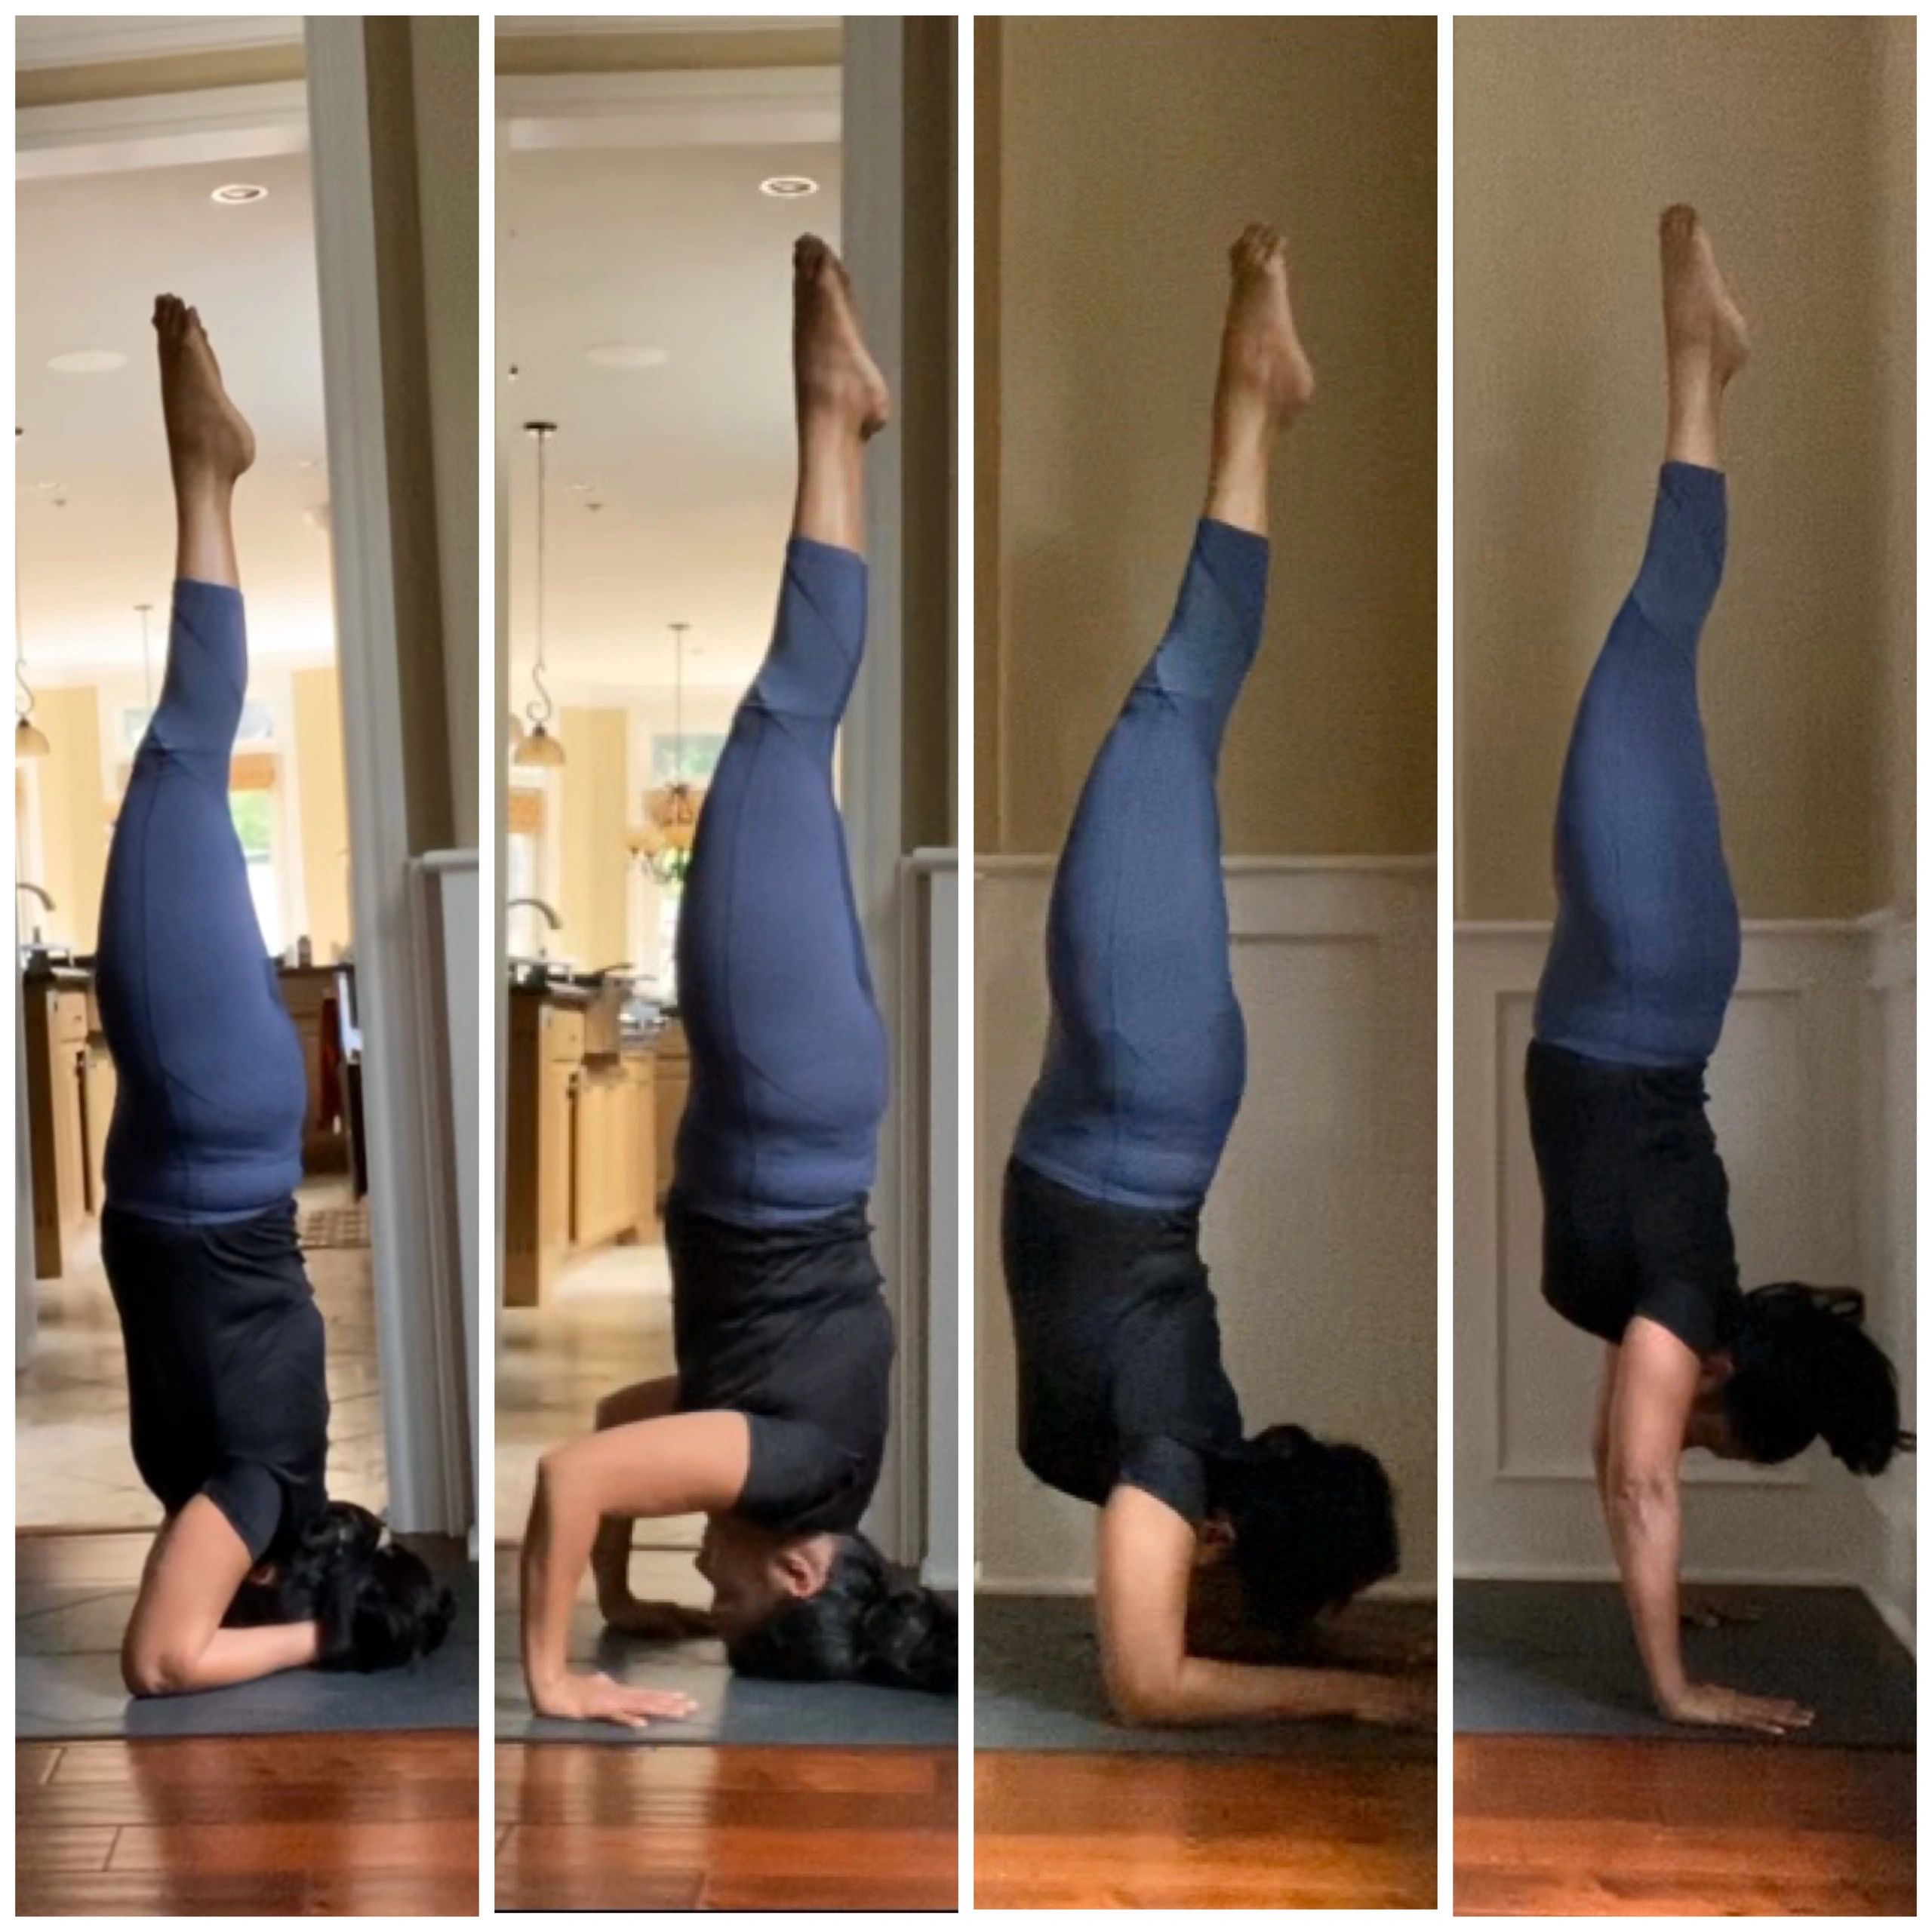 Headstand, Tripod Stand, Forearm Stand, Handstand